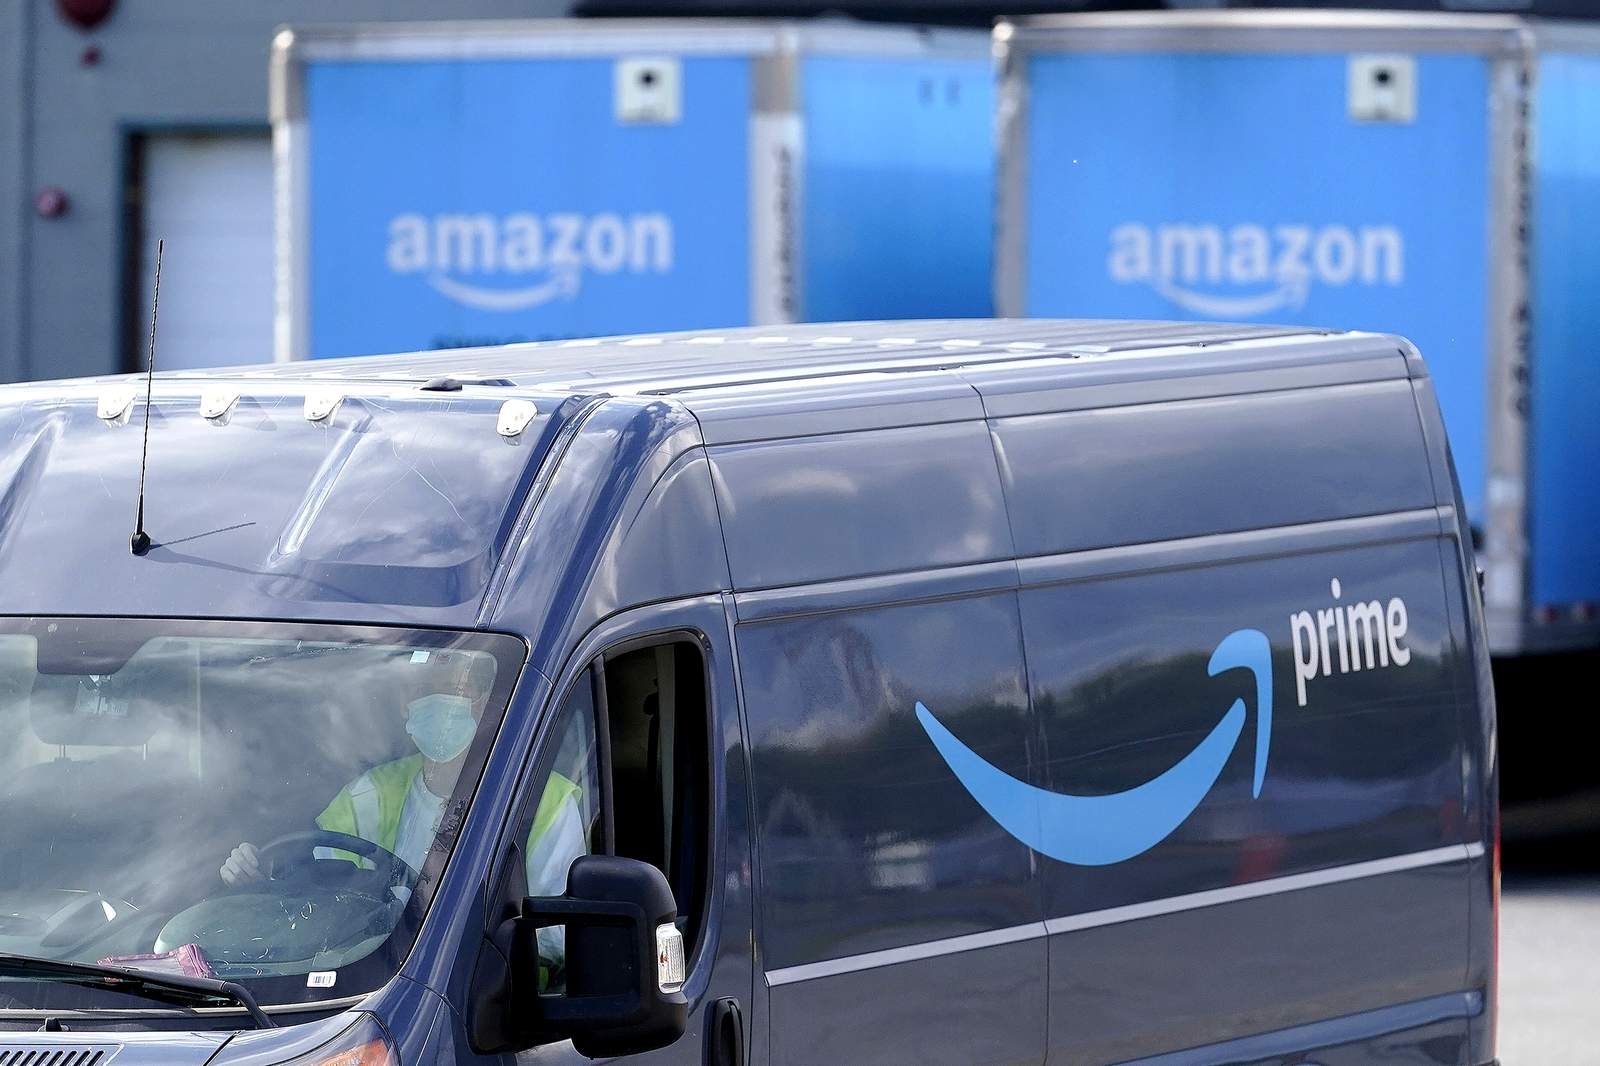 FTC says Amazon took away $62 million in tips from drivers